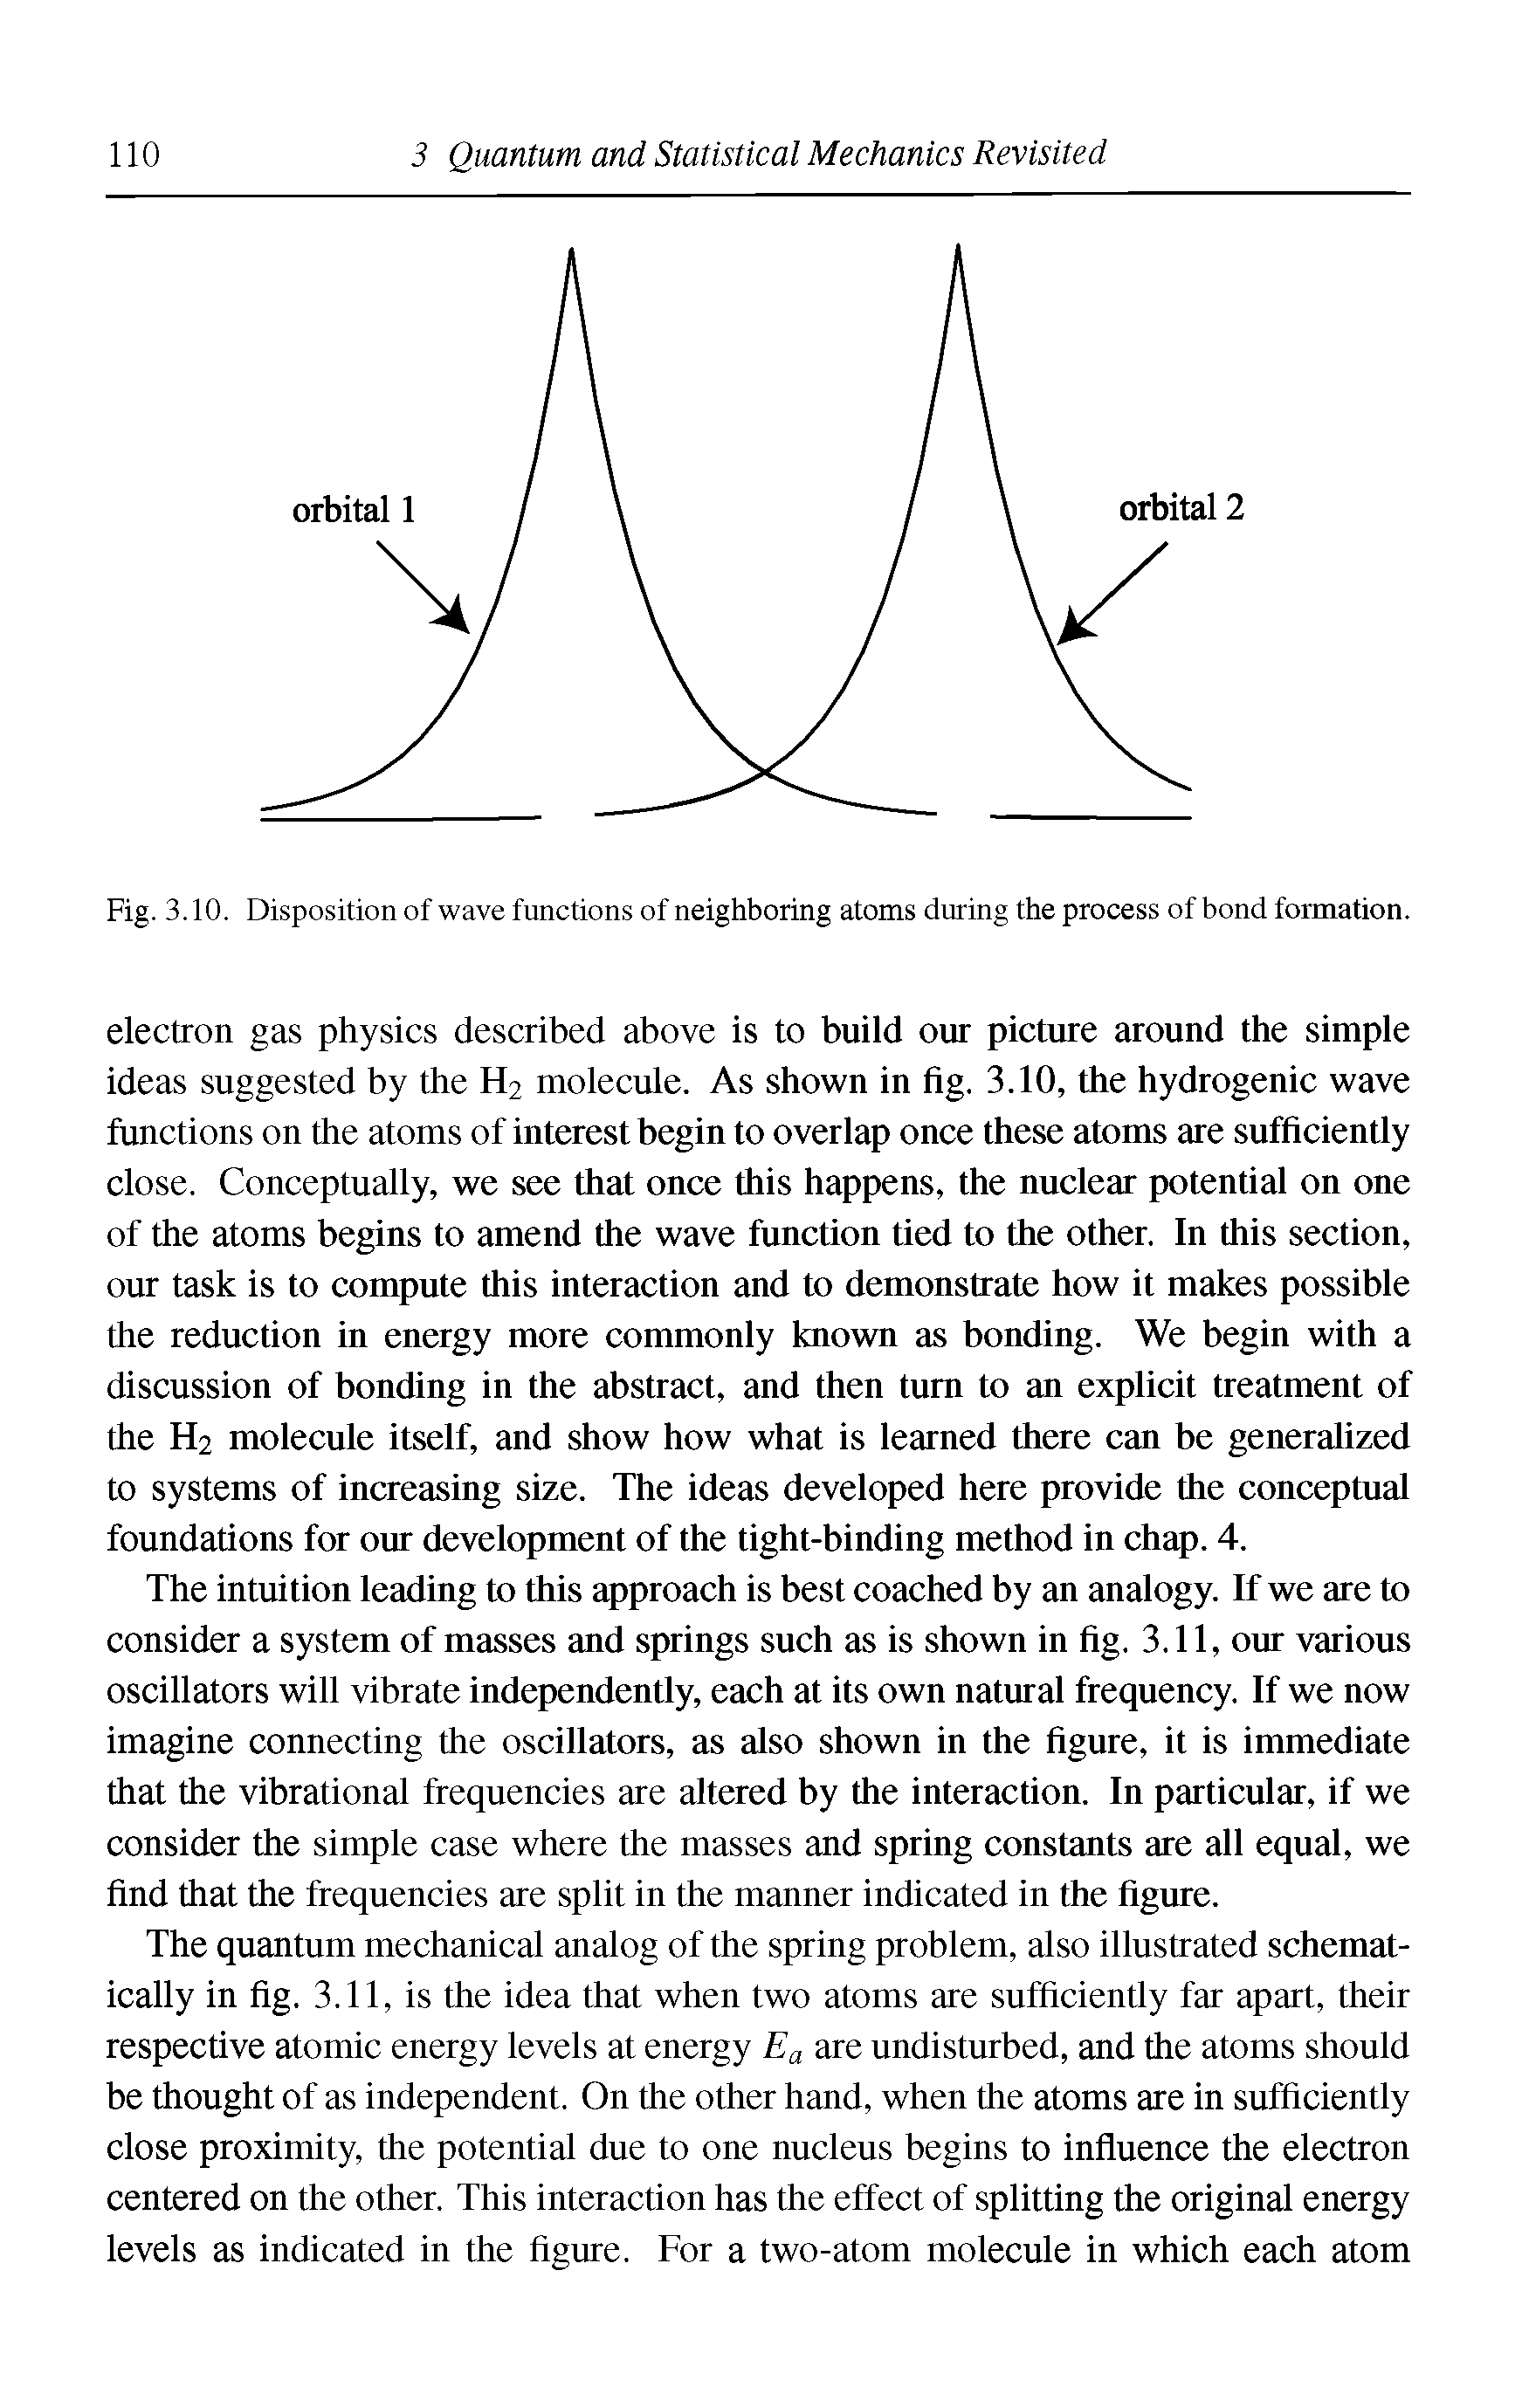 Fig. 3.10. Disposition of wave functions of neighboring atoms during the process of bond formation.